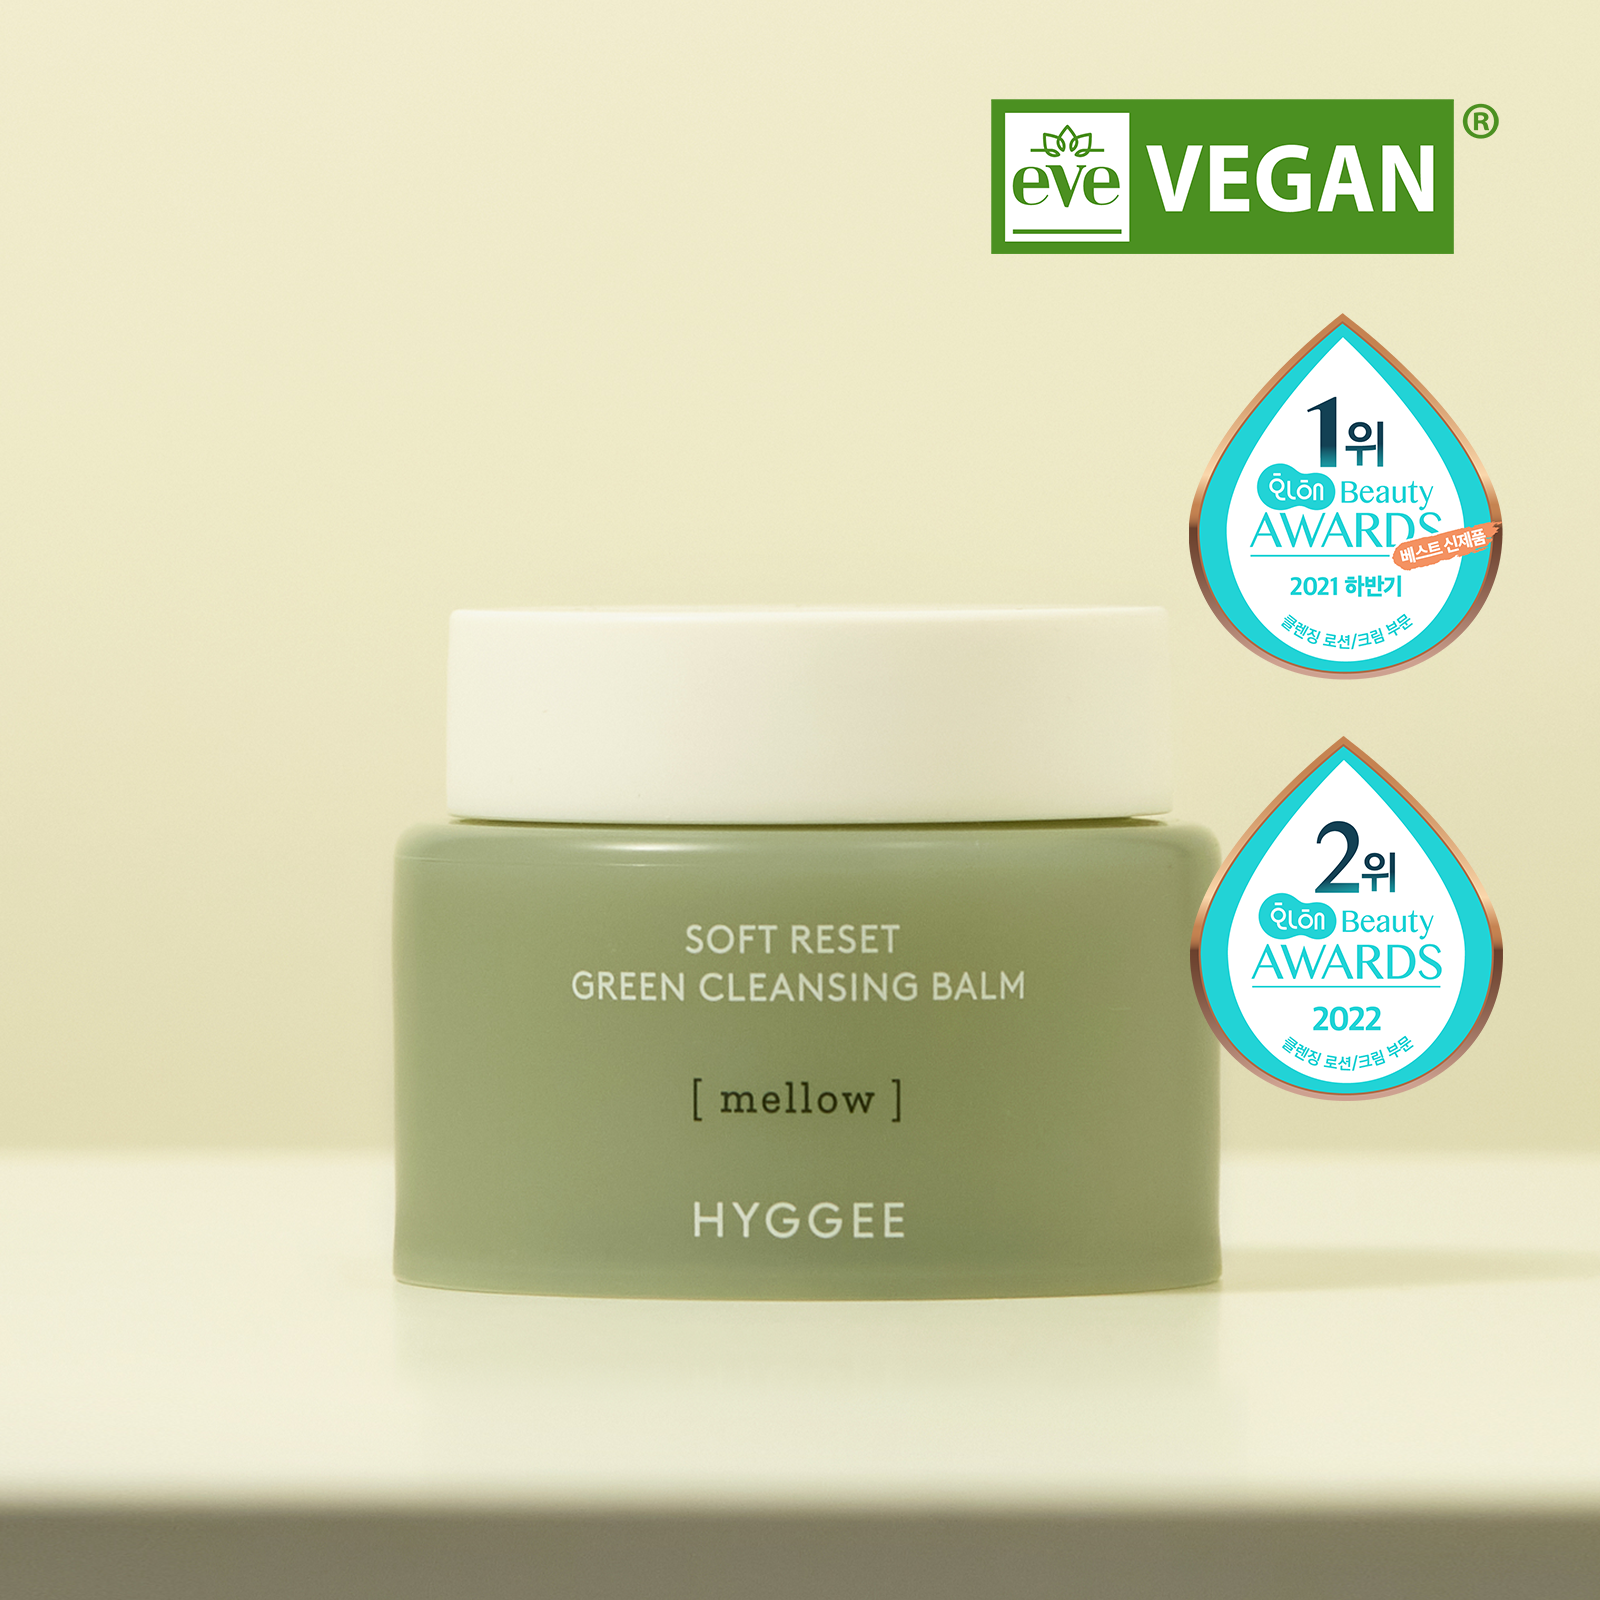 HYGGEE Soft Reset Green Cleansing Balm 100ml on sales on our Website !